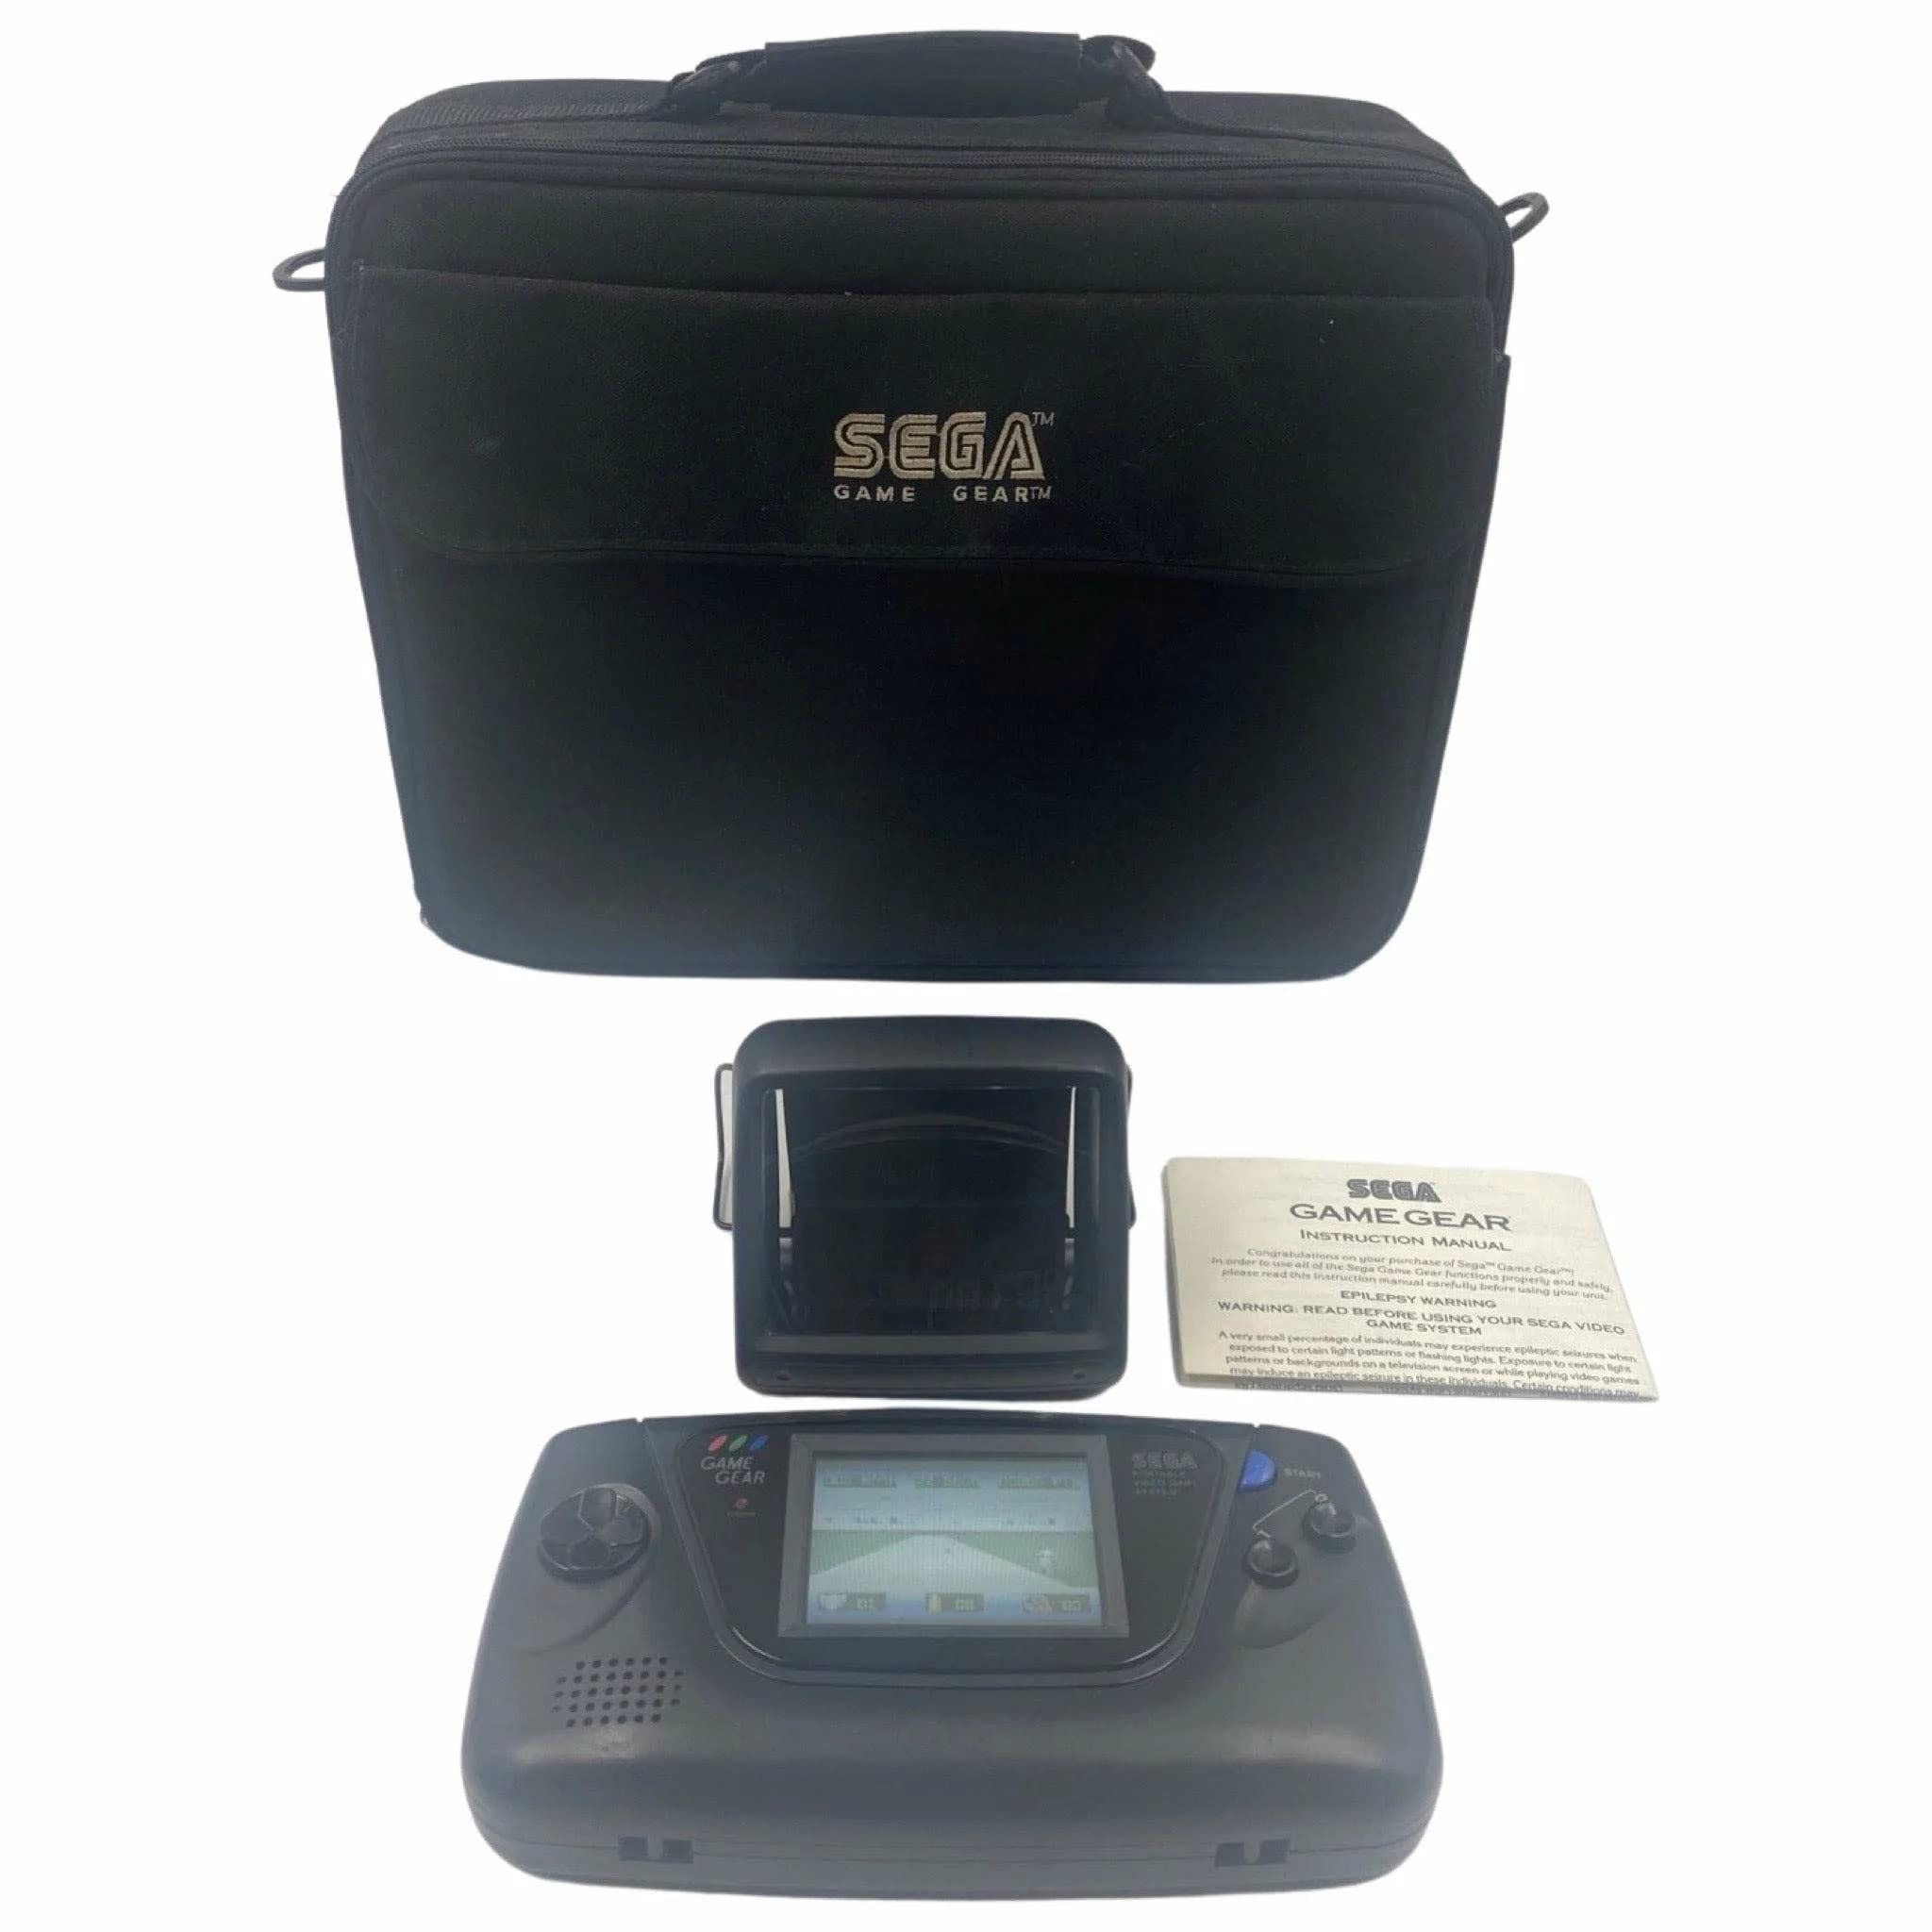 Immerse yourself in endless hours of fun with the legendary Game Gear Sega. With its vibrant colors, compact size, and a wide selection of games, this handheld console will transport you back in time and provide hours of entertainment!